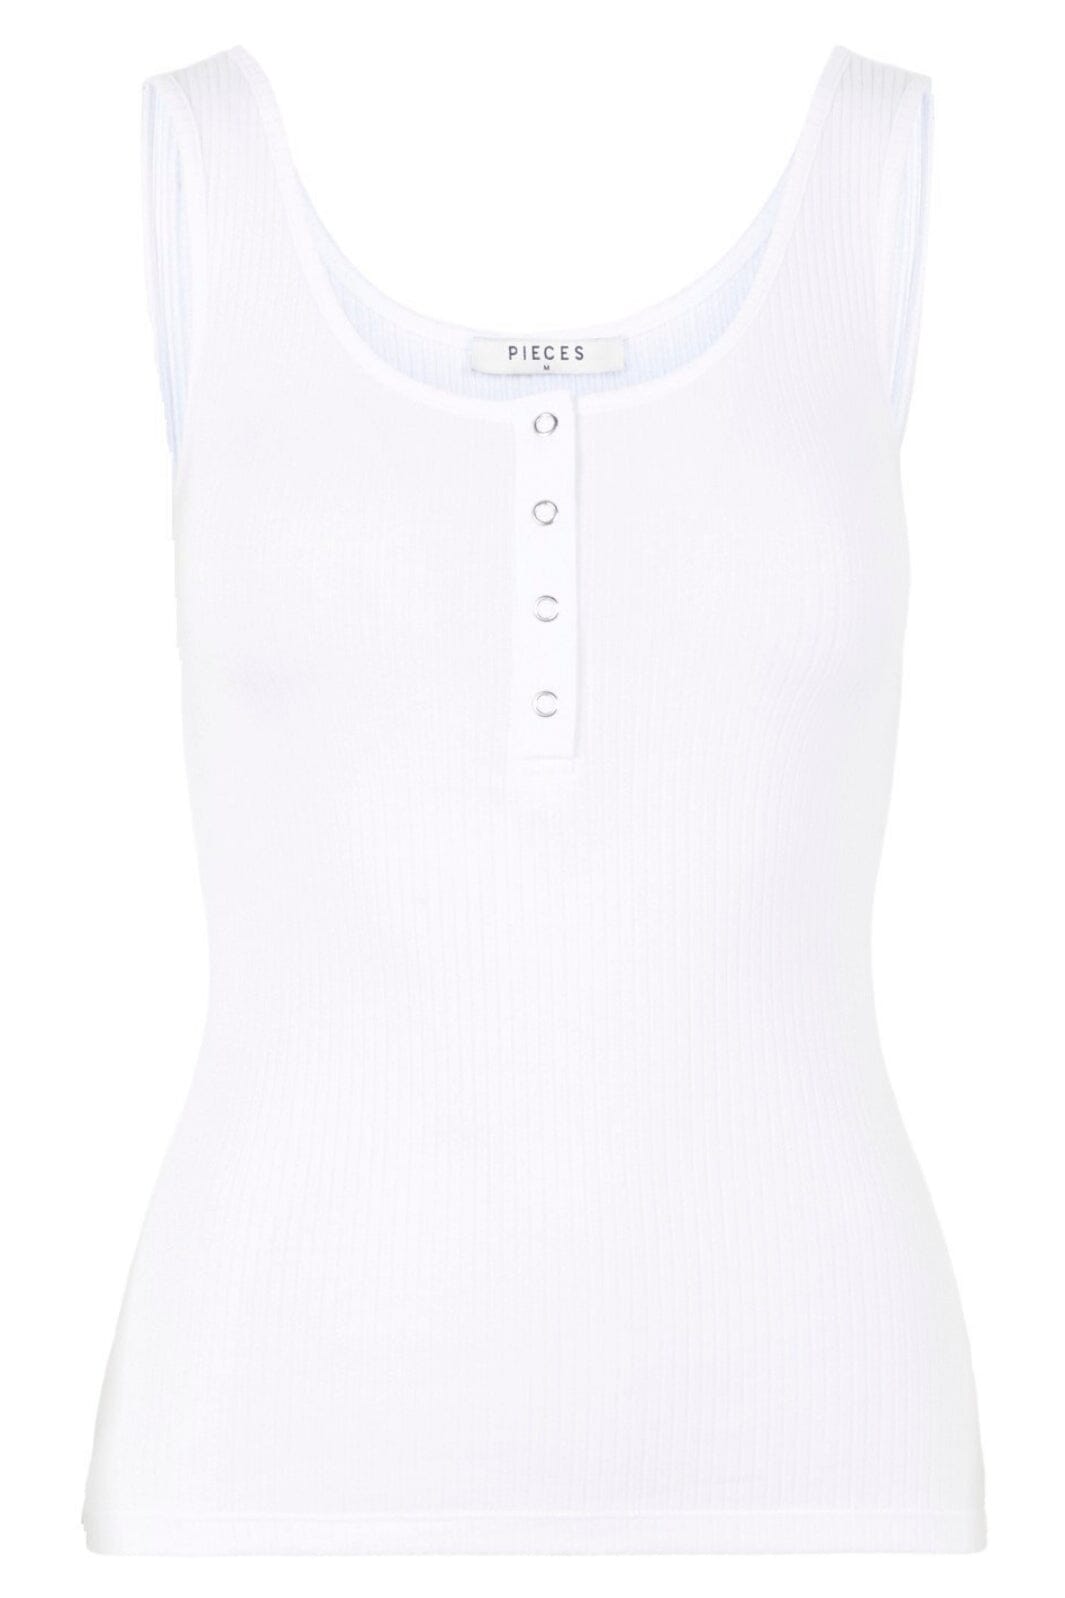 Pieces - Pckitte Tank Top - Bright White Toppe 